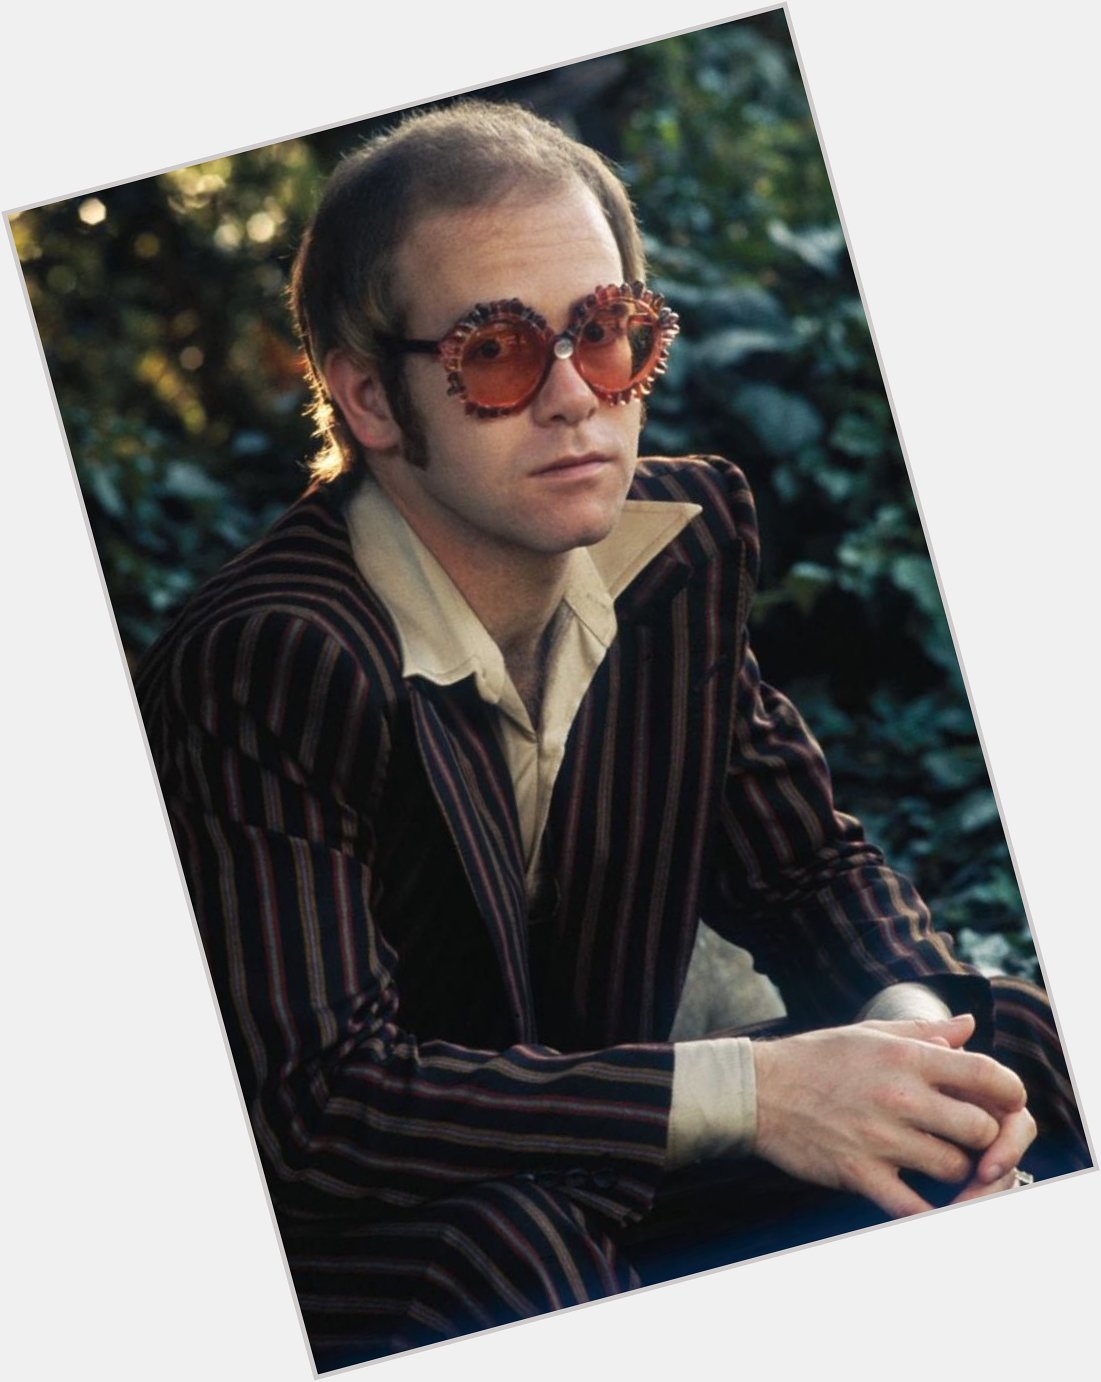 Happy 76th birthday to the legendary Sir Elton John, who was born on this day in 1947. 